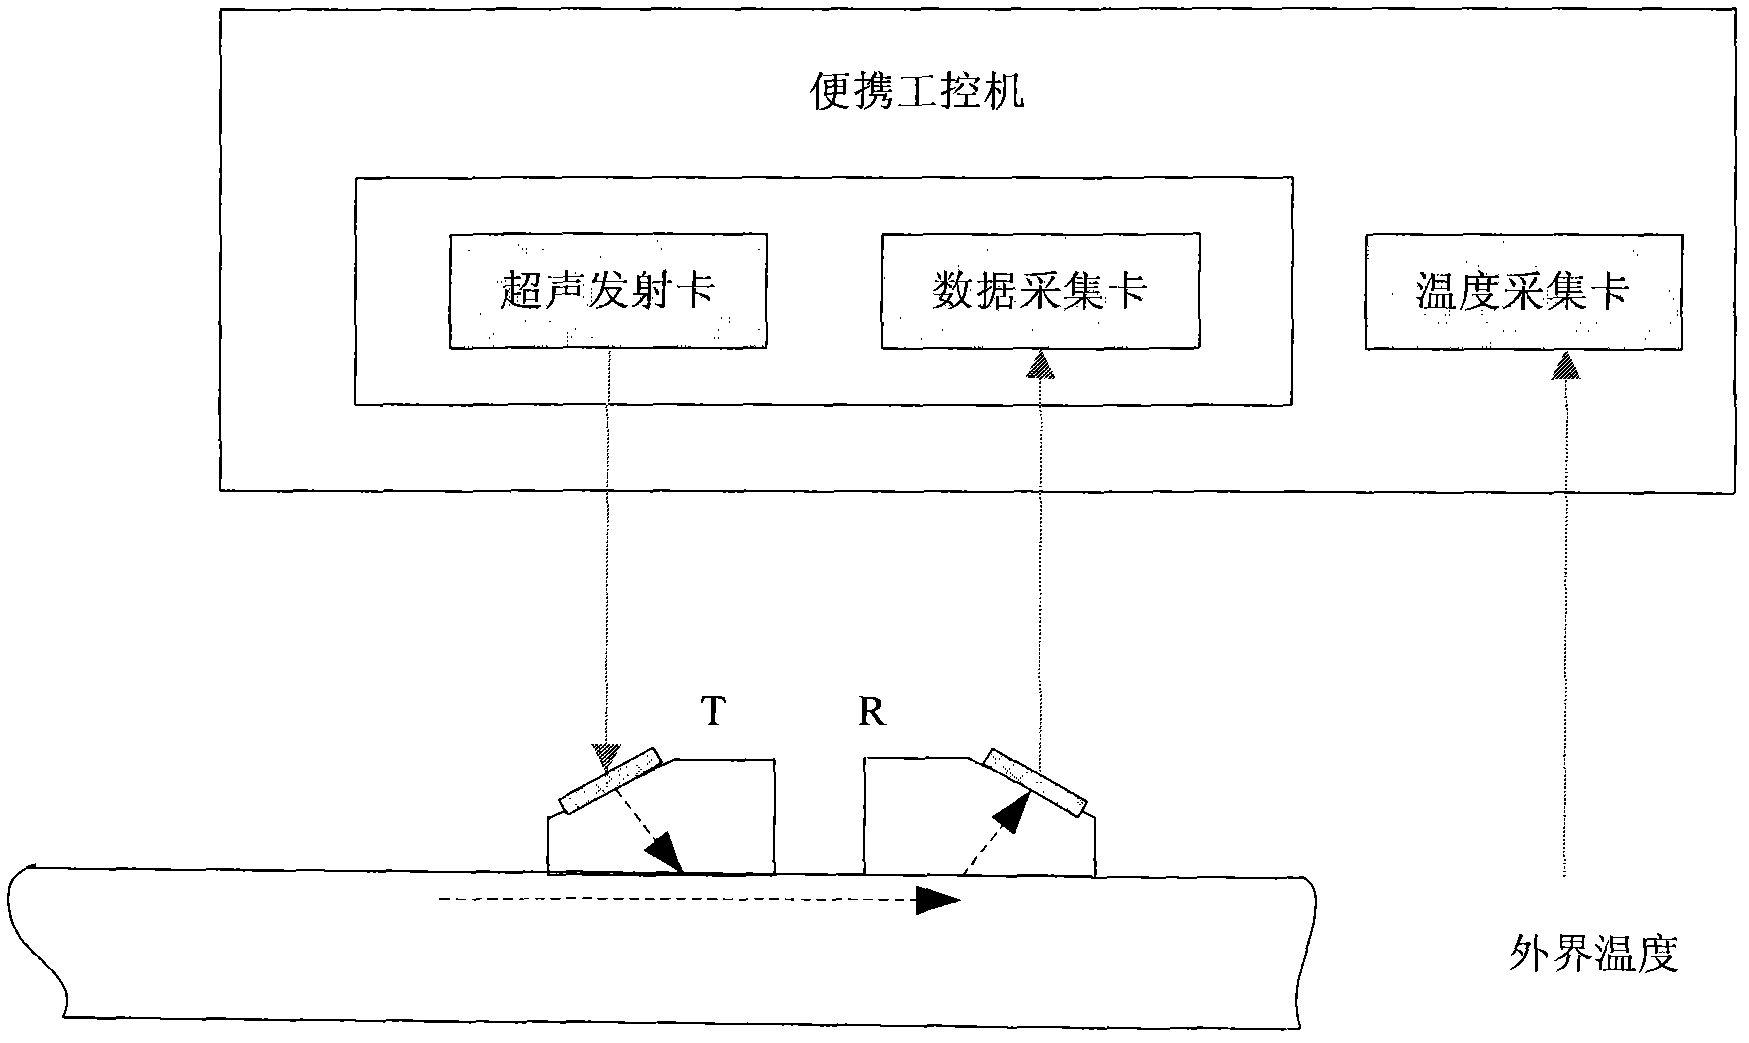 Device for detecting residual stress close to surfaces of metal materials